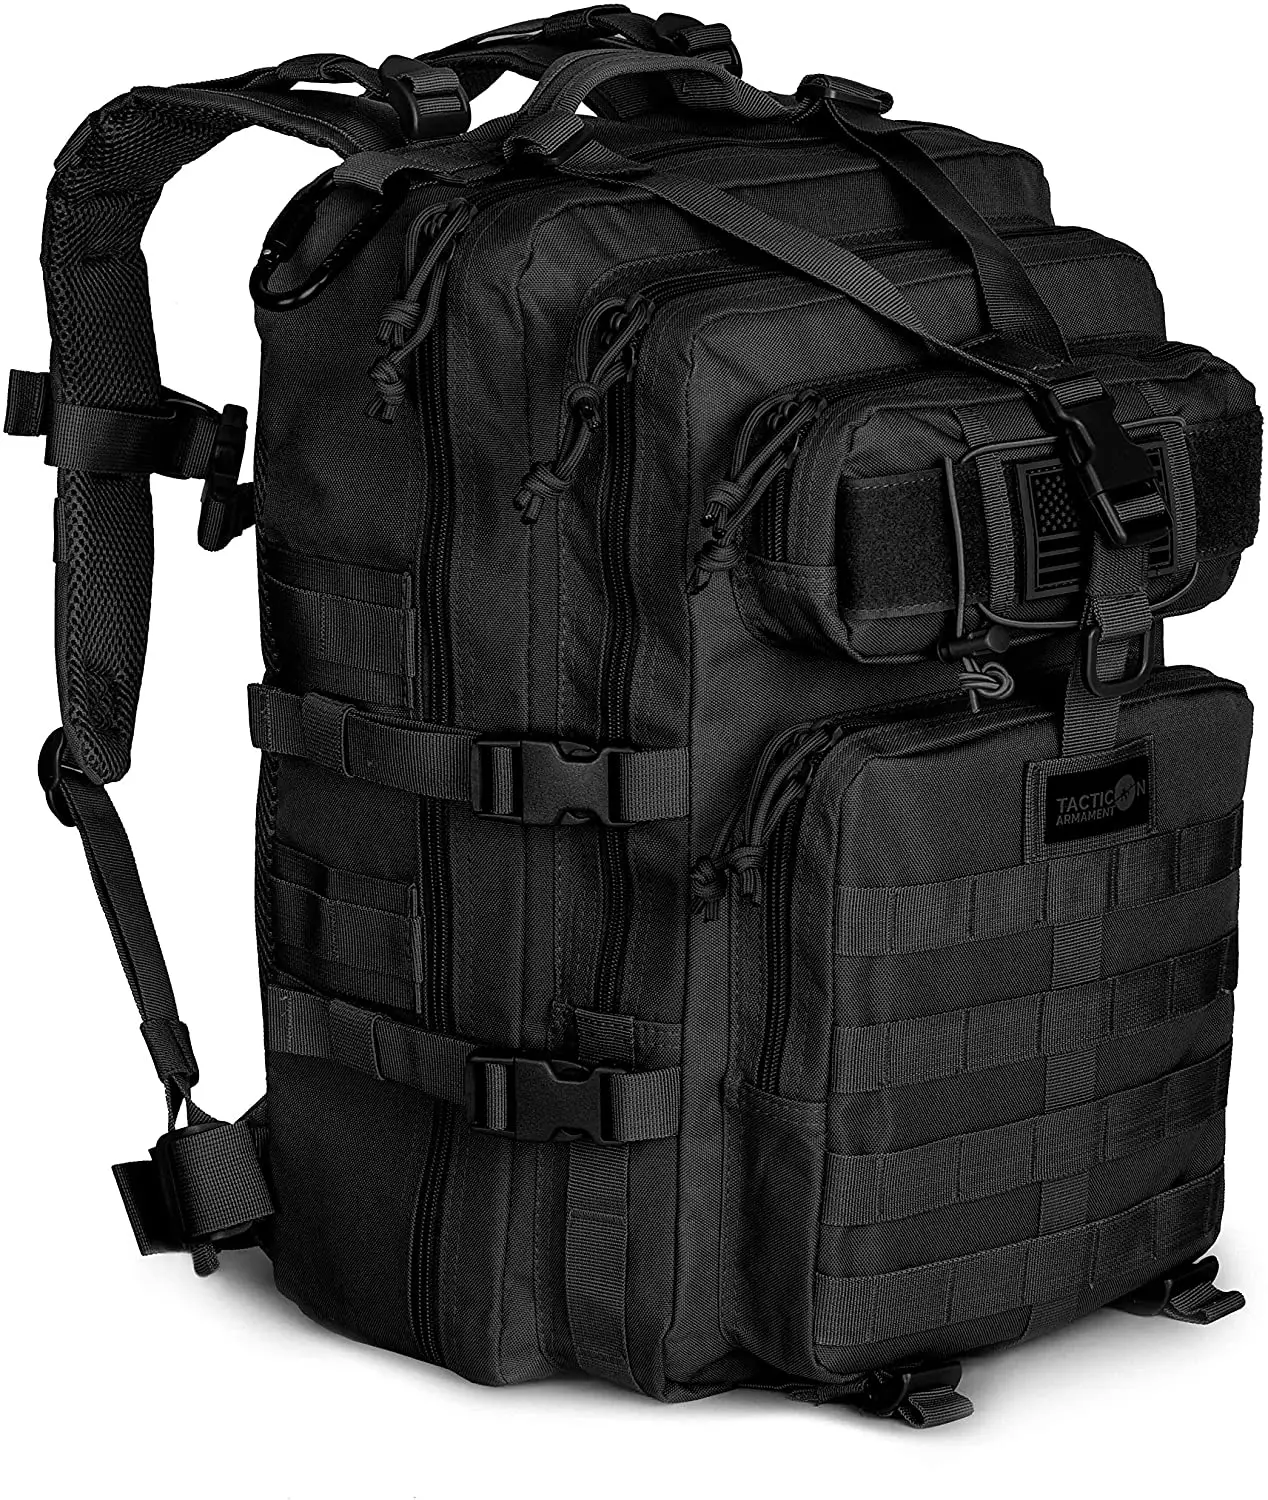 Military Tactical Backpack | 1 To 3 Day Assault Bag | Amphibious Military  Bag | 40l Insect Bag (black) Waterproof High Quality - Sport Bags Covers -  AliExpress